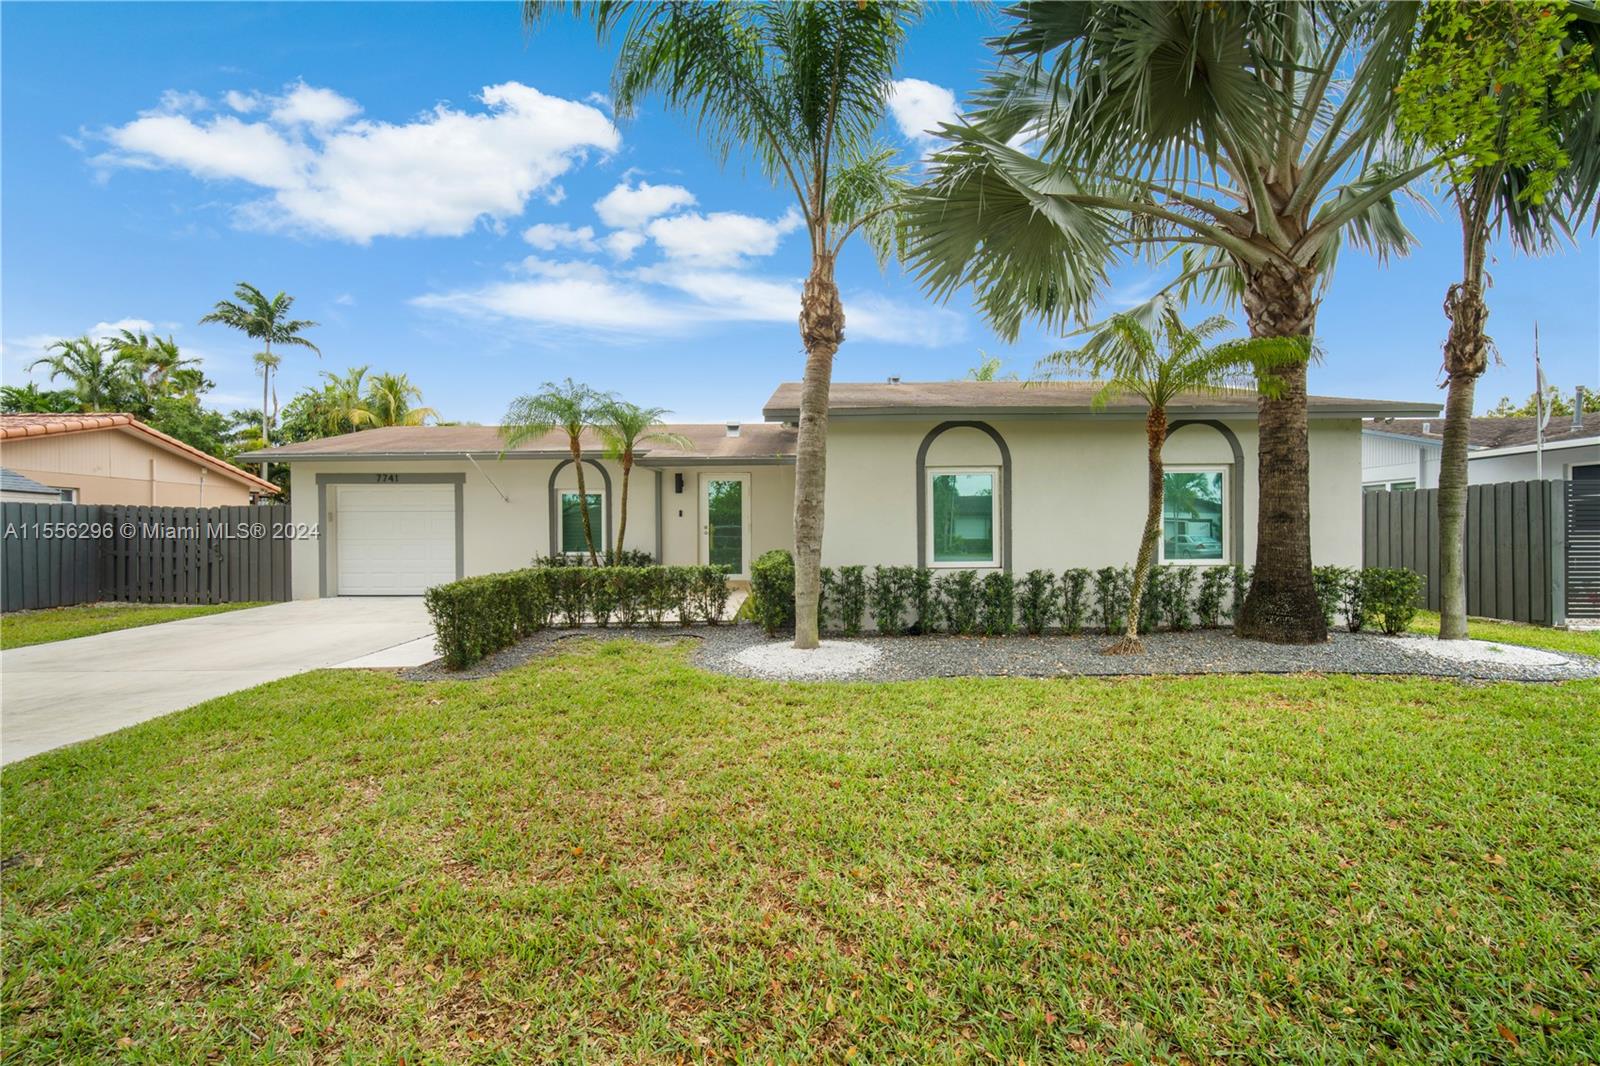 7741 SW 127th Dr, Miami, Florida 33183, 3 Bedrooms Bedrooms, ,2 BathroomsBathrooms,Residential,For Sale,7741 SW 127th Dr,A11556296